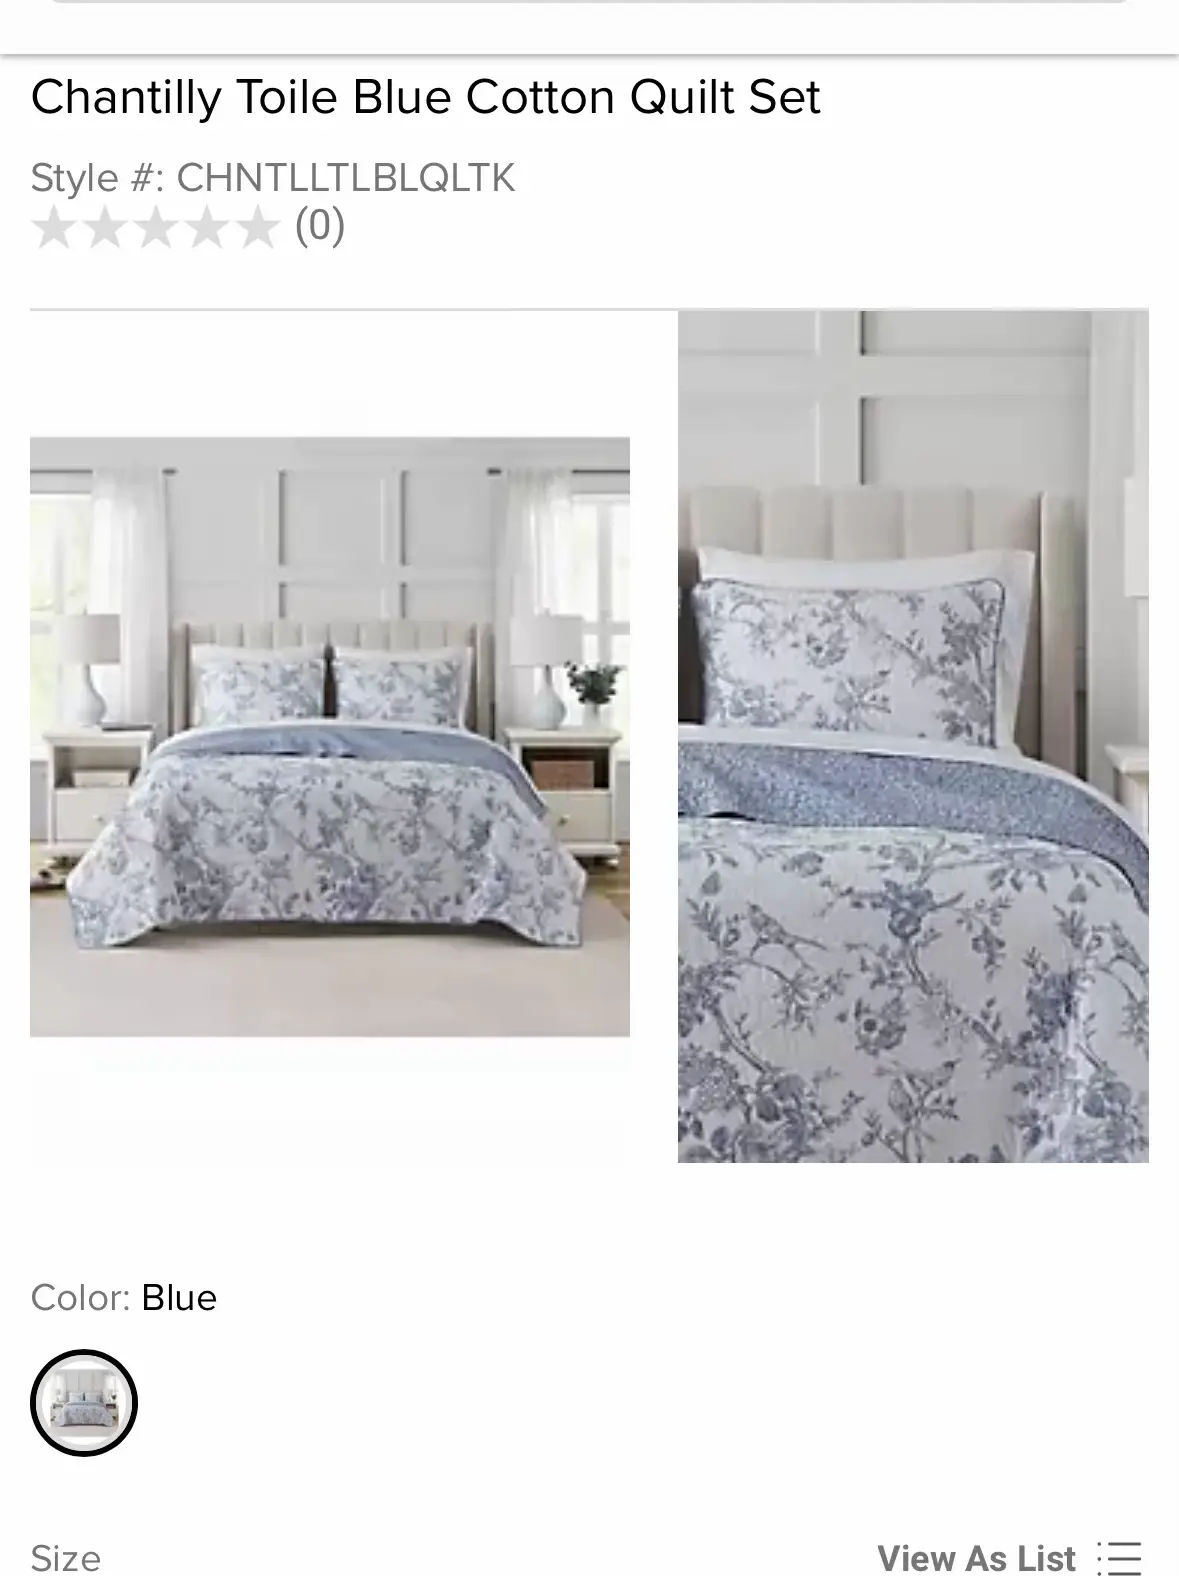 Chantilly Toile Blue and White Bird and Floral Mini Quilt Set Bedding